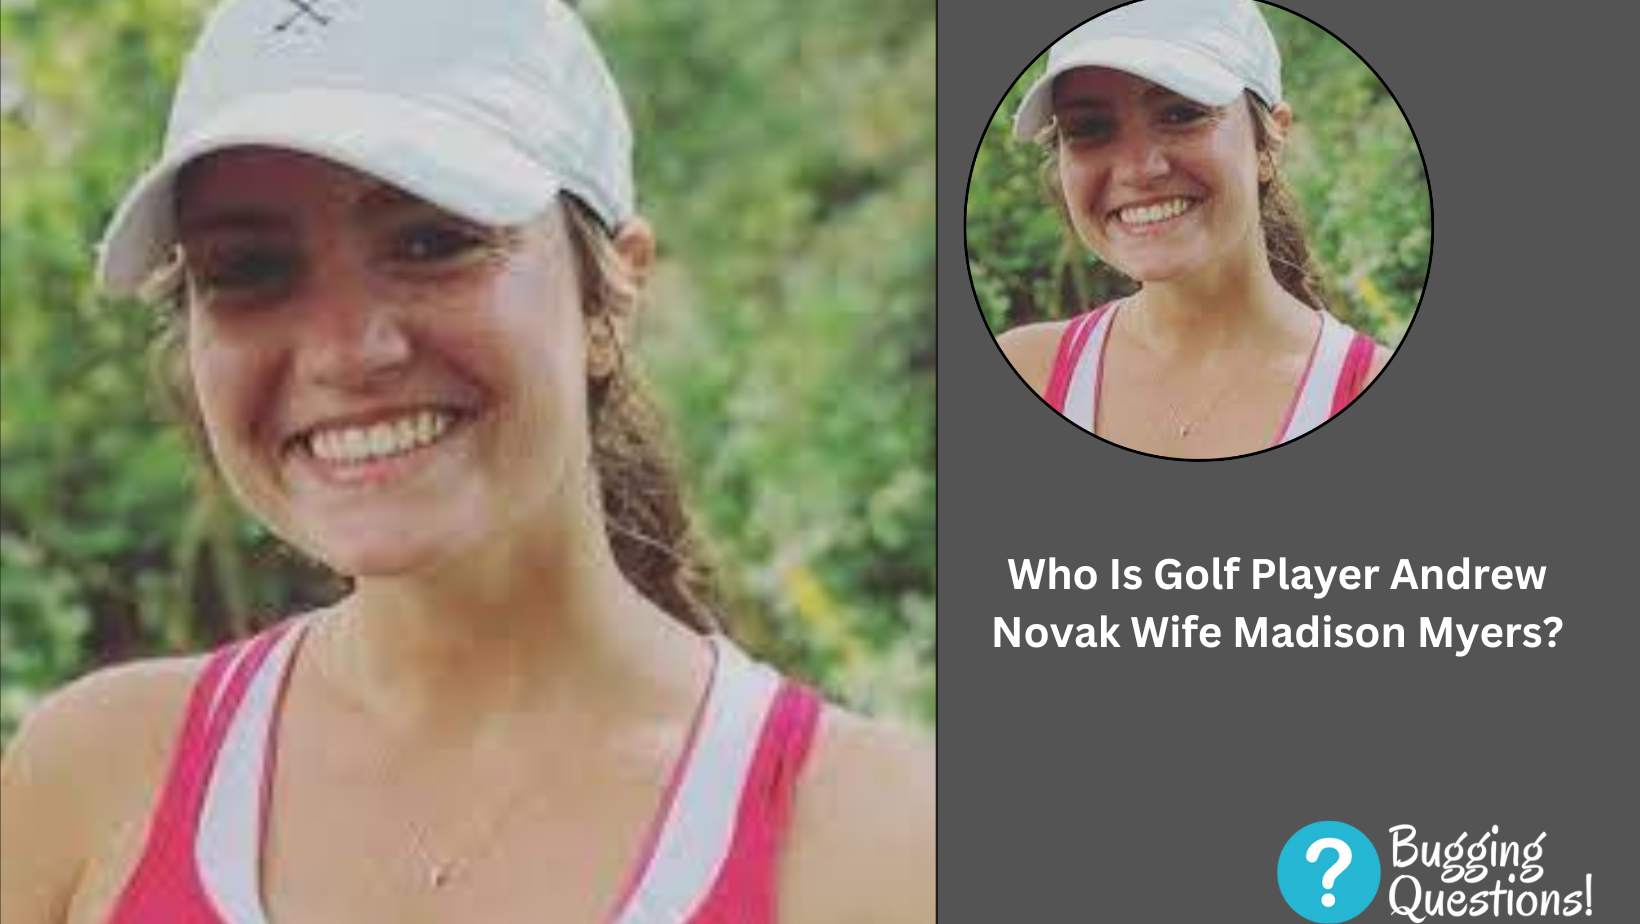 Who Is Golf Player Andrew Novak Wife Madison Myers?